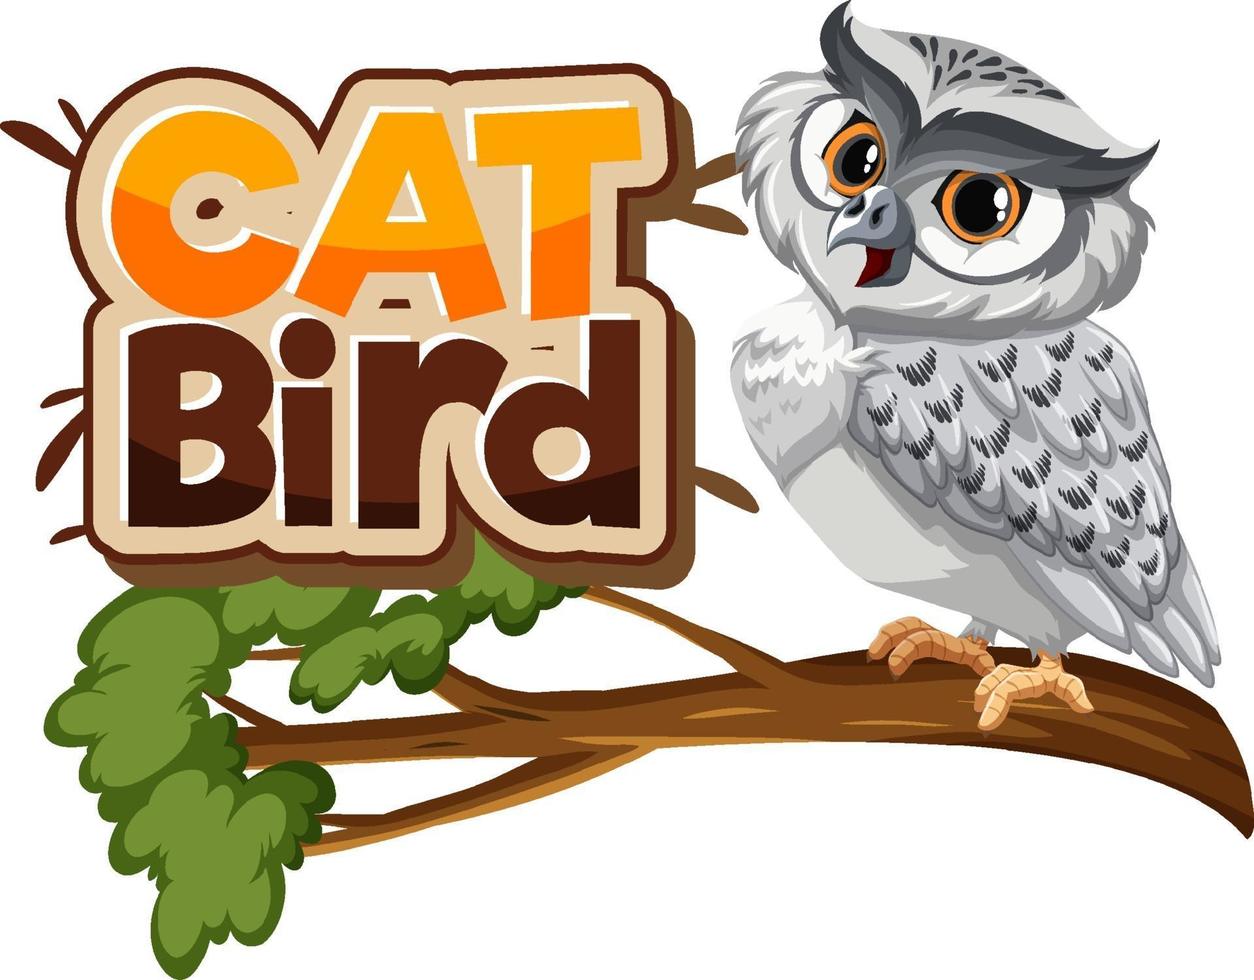 White owl on branch with Cat Bird font banner isolated vector